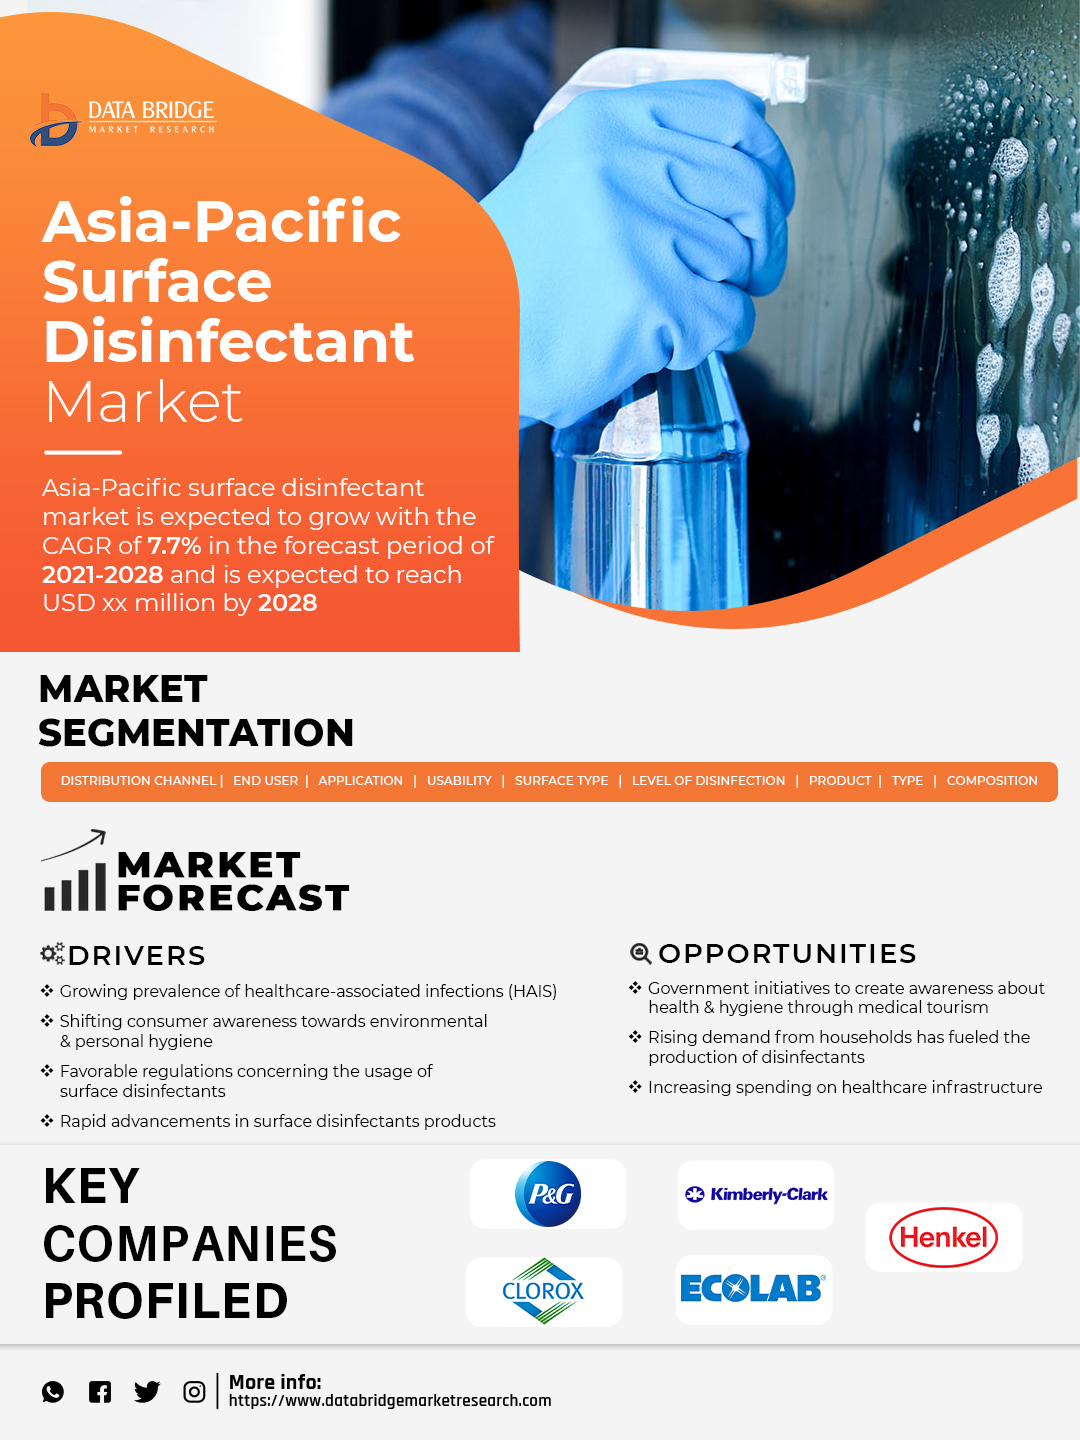 Asia-Pacific Surface Disinfectant Market